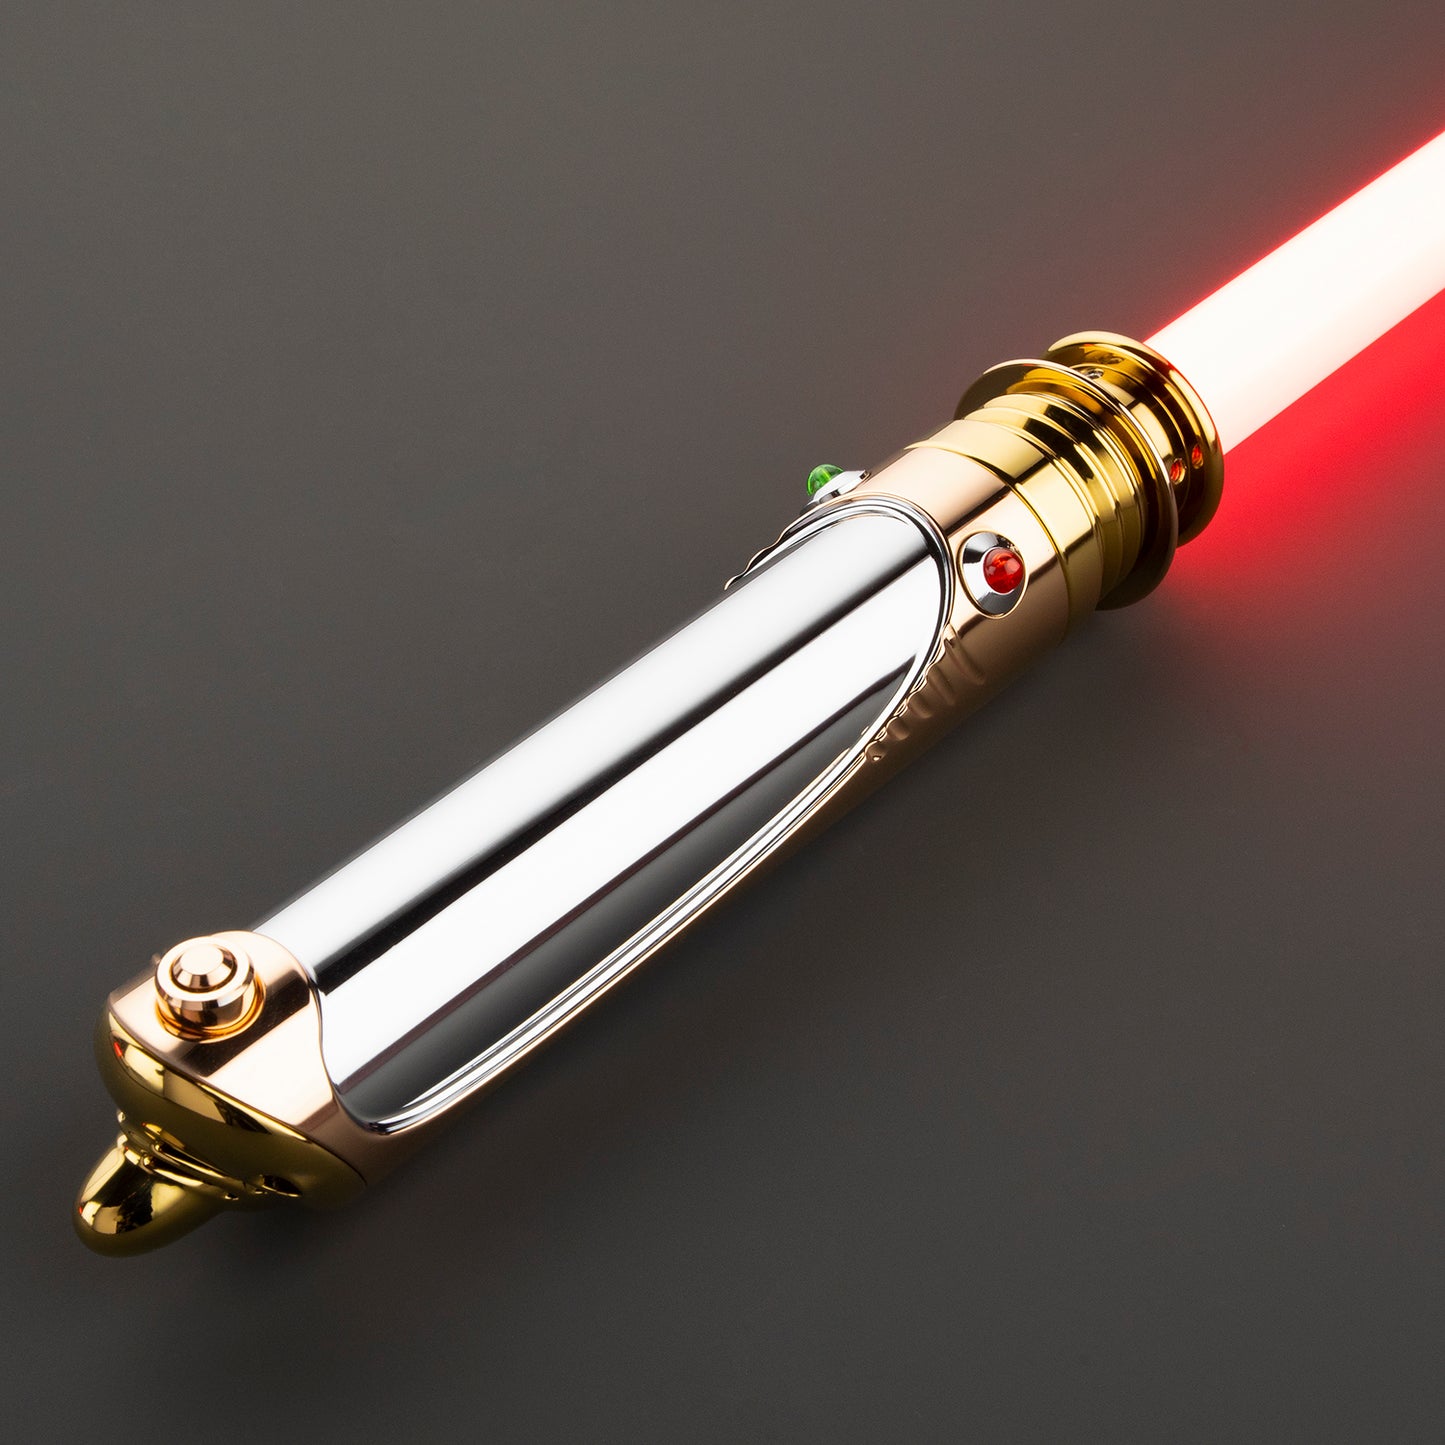 Unlimited Power: Darth Sidious’s Lightsaber